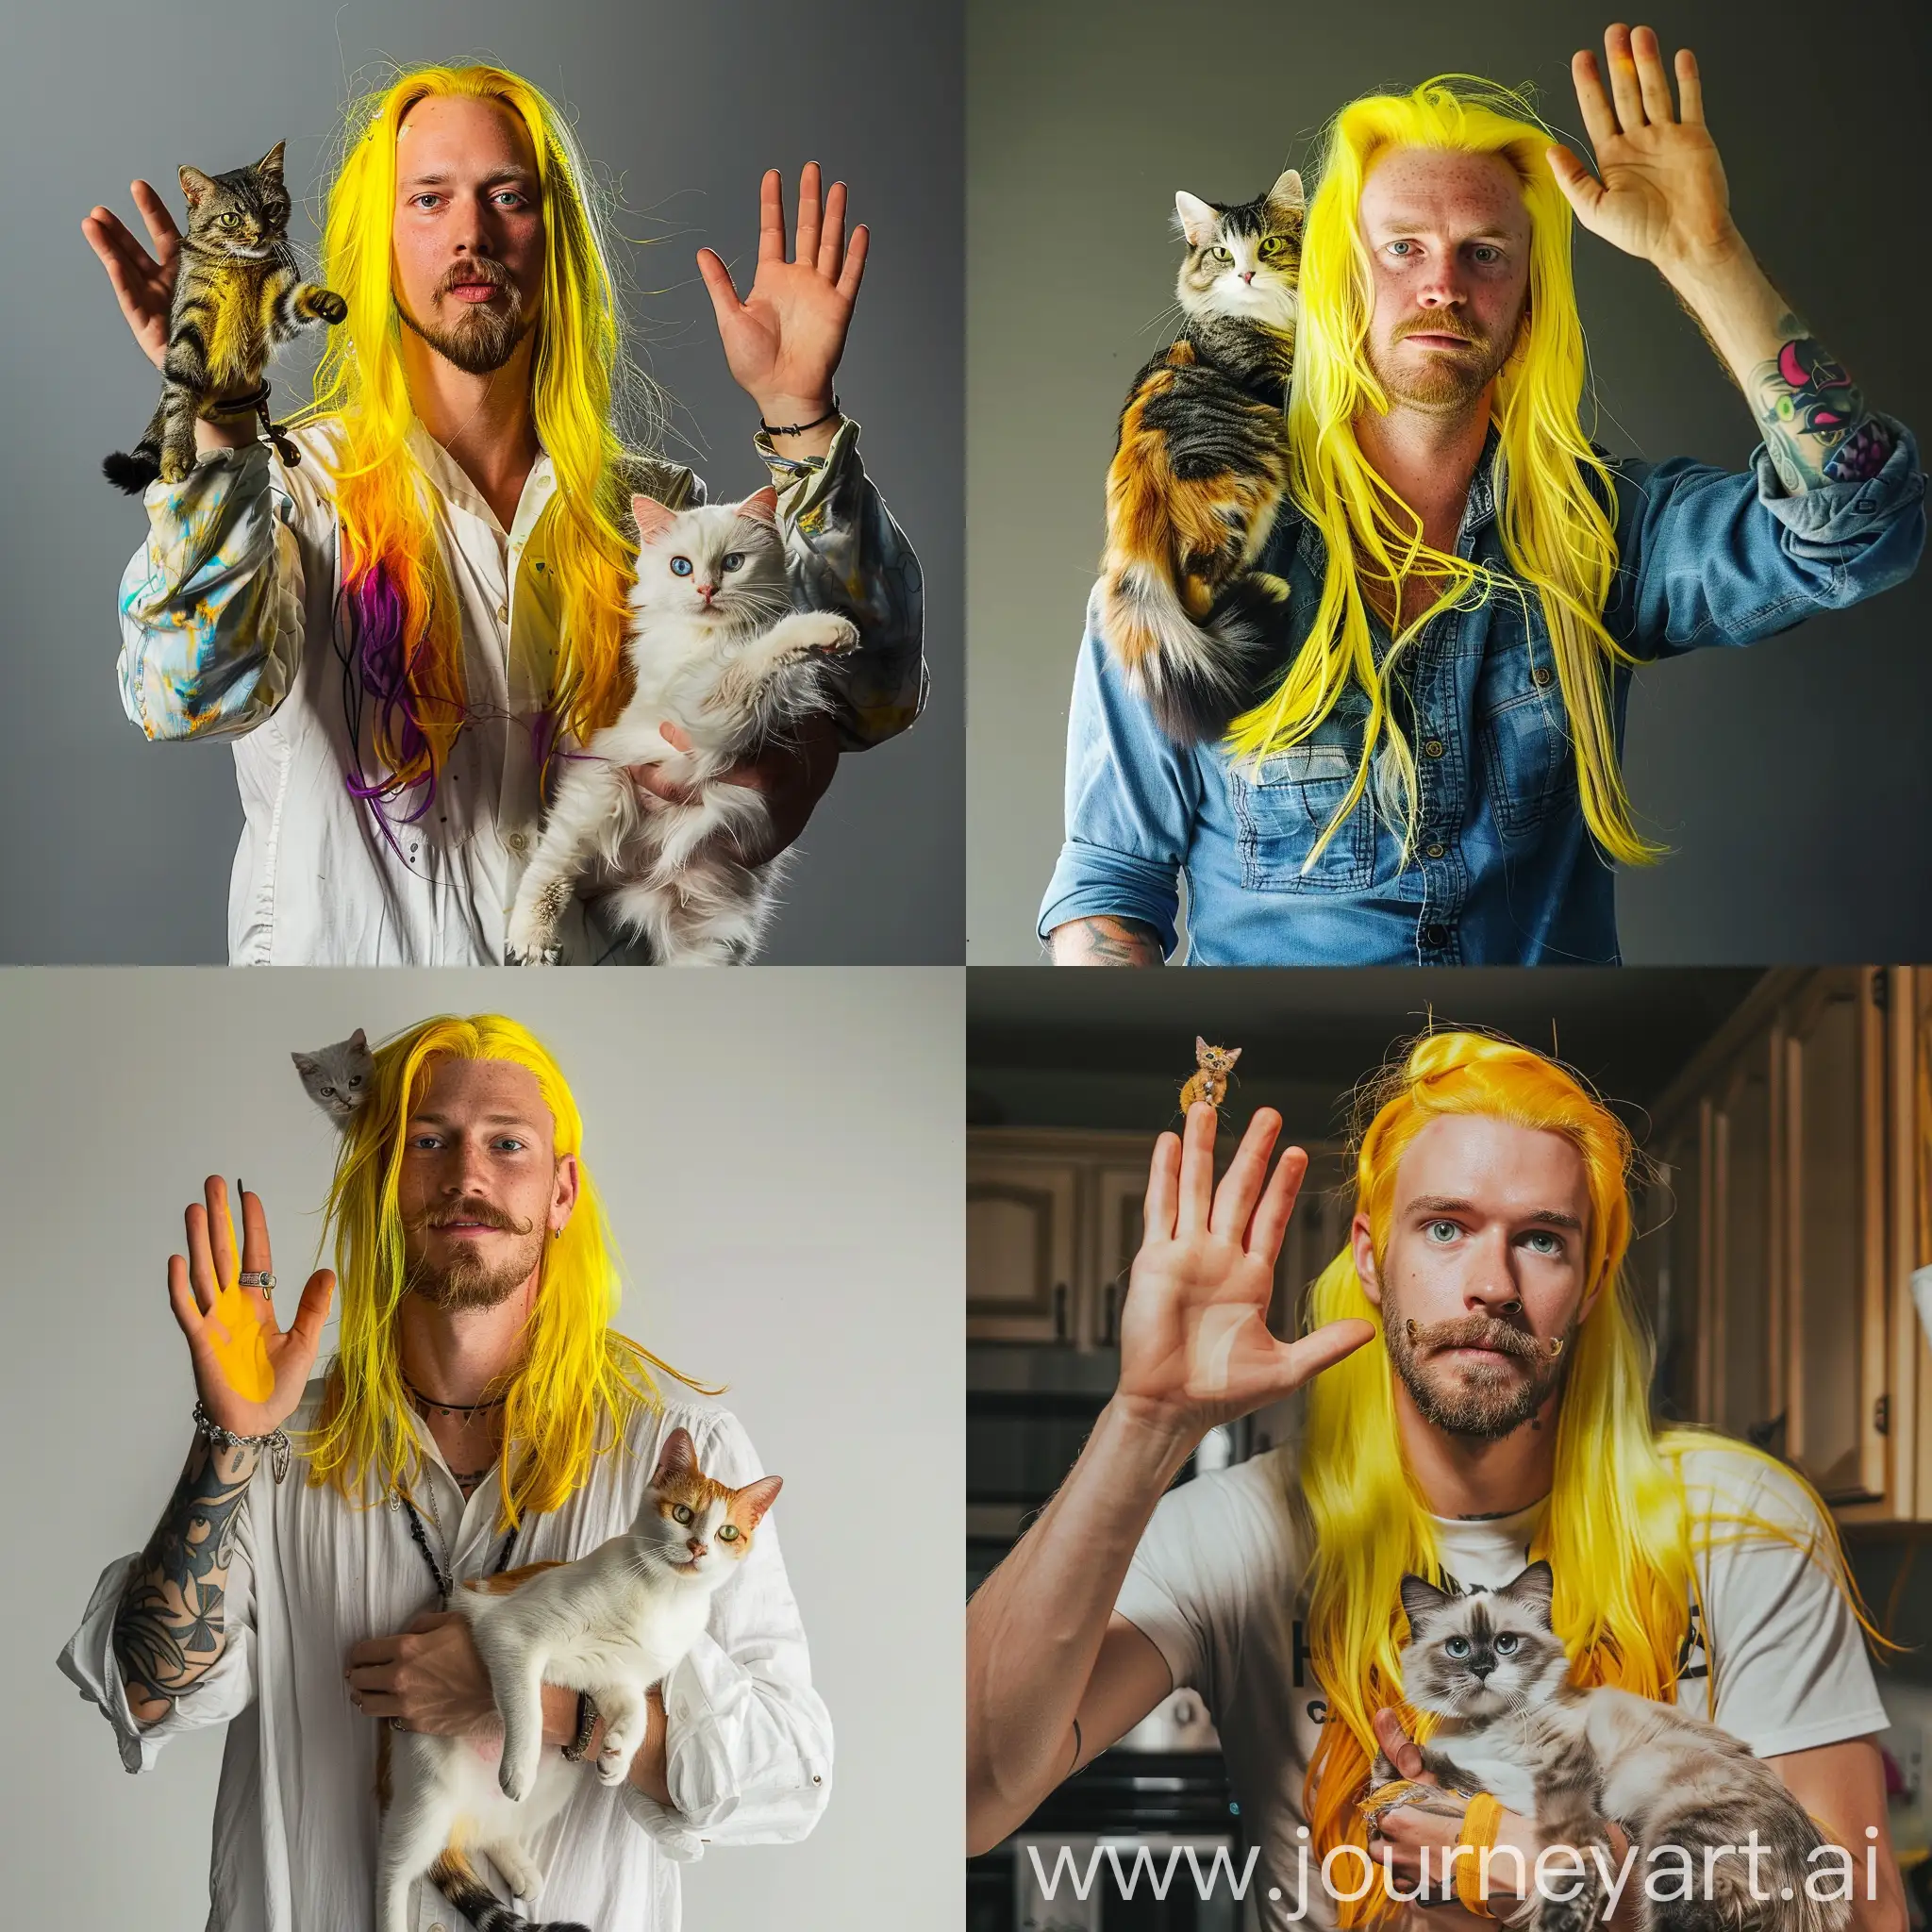 Smiling-White-Man-with-Long-Yellow-Hair-Holding-Cat-and-Waving